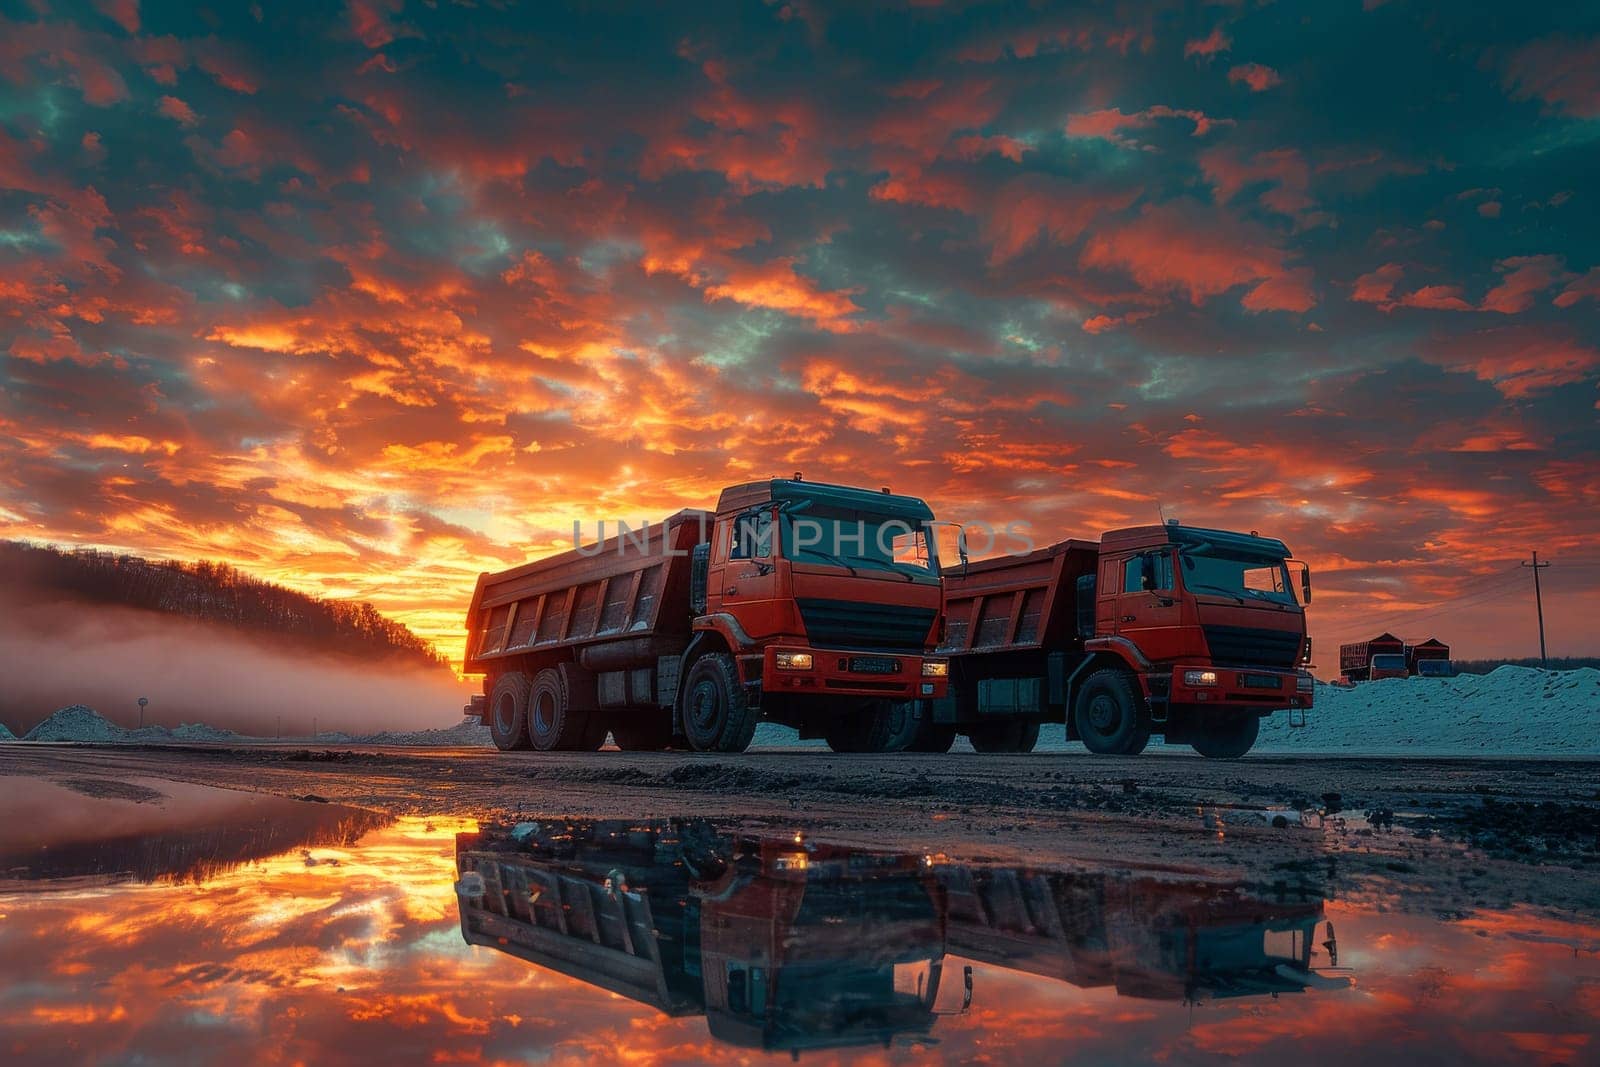 Two red dump trucks are parked on a road near a lake. The sky is orange and the sun is setting